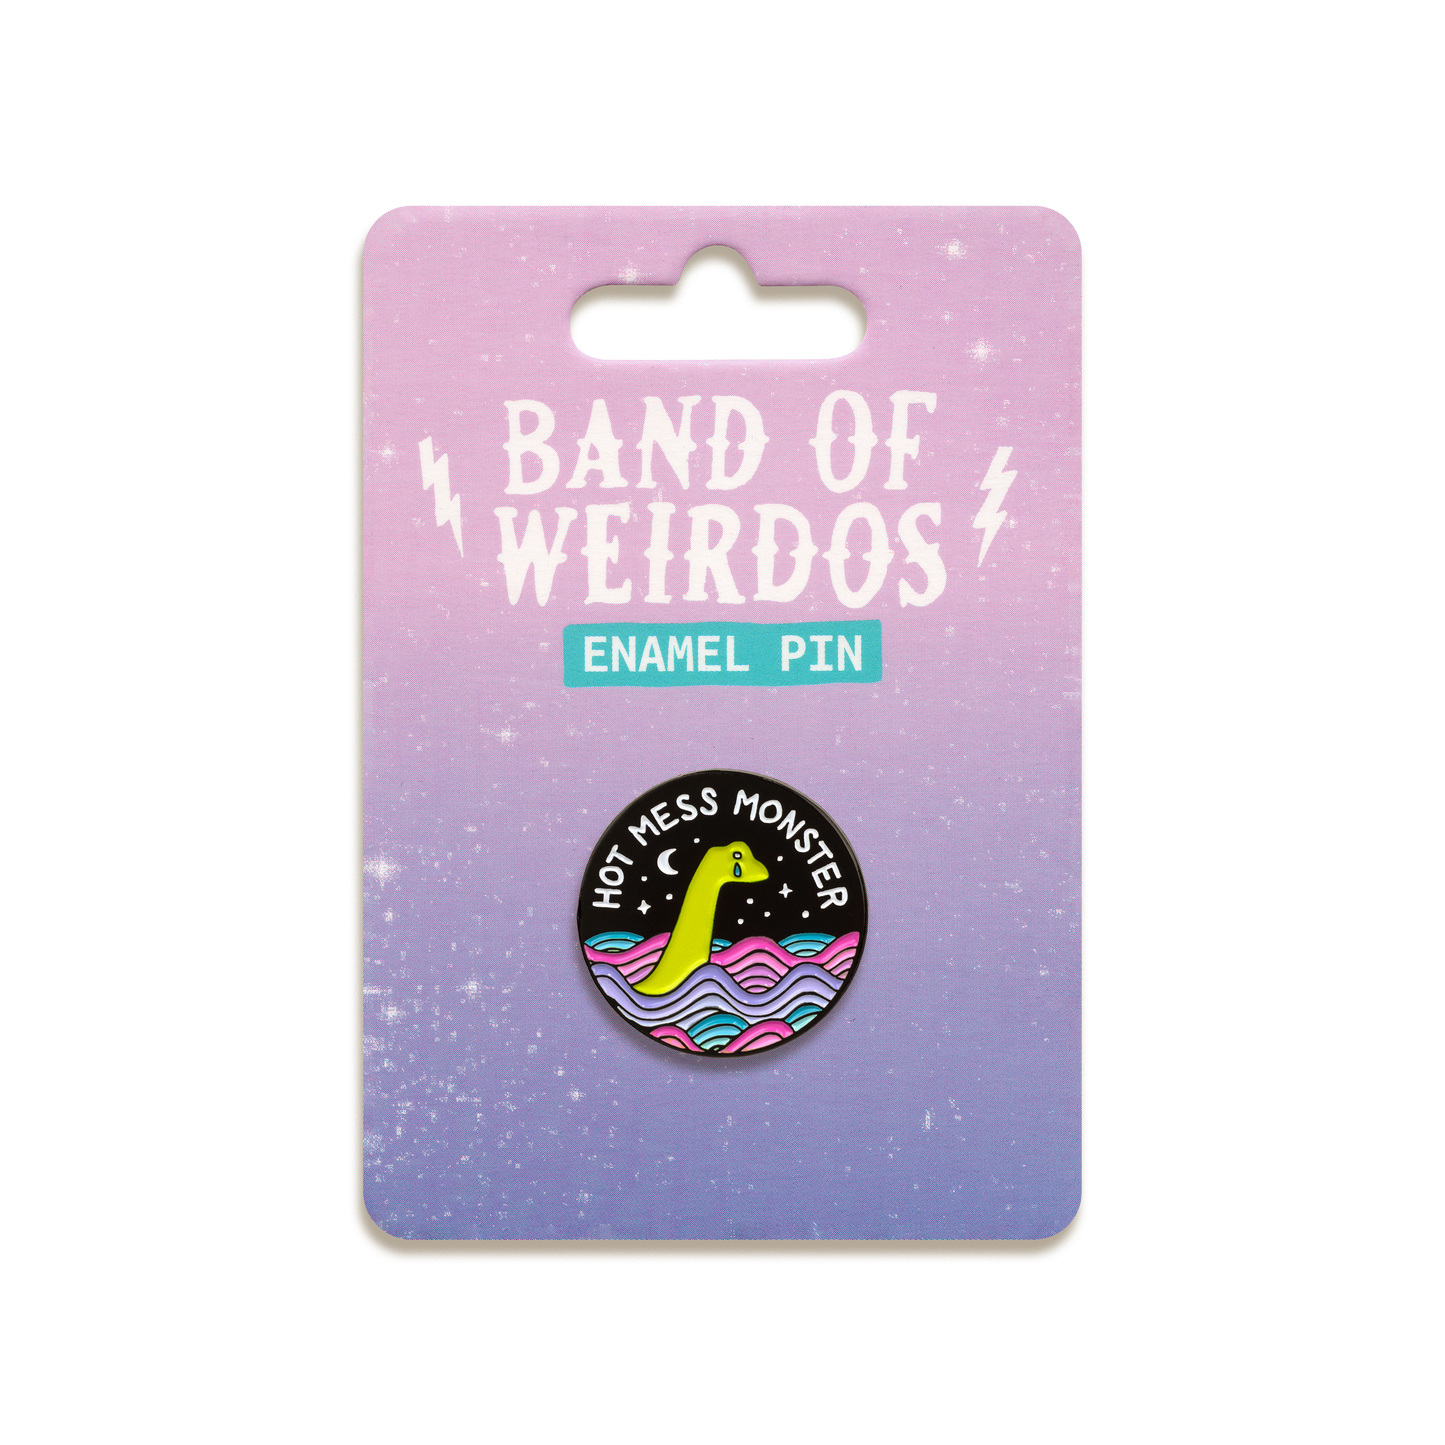 Hot Mess Monster Enamel Pin by Band of Weirdos